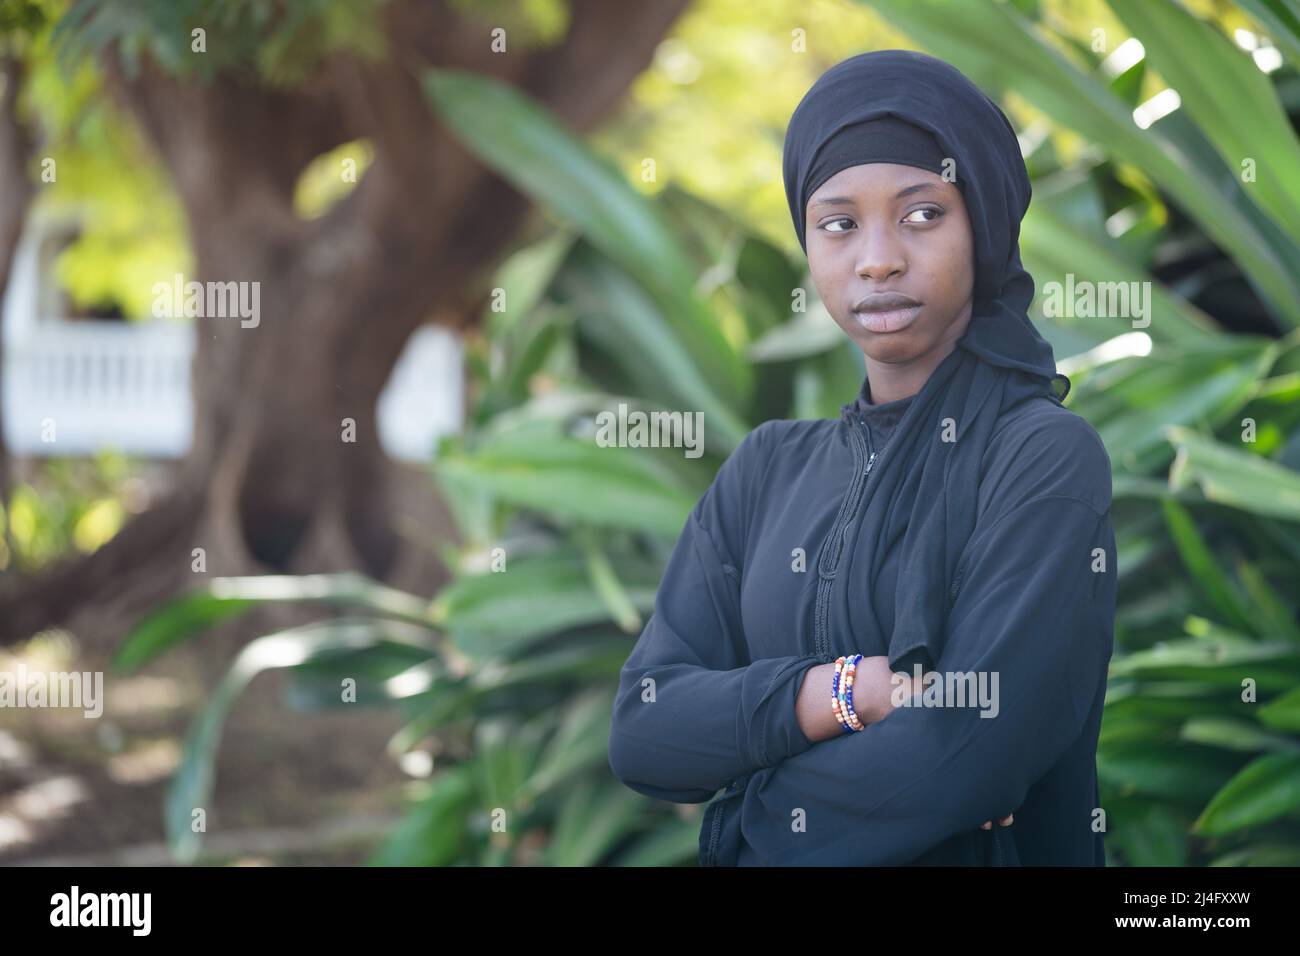 Outdoor shot of a pensive young African girl with her arms crossed in strict black clothing with a headscarf, symbolising troubles and doubts of adole Stock Photo